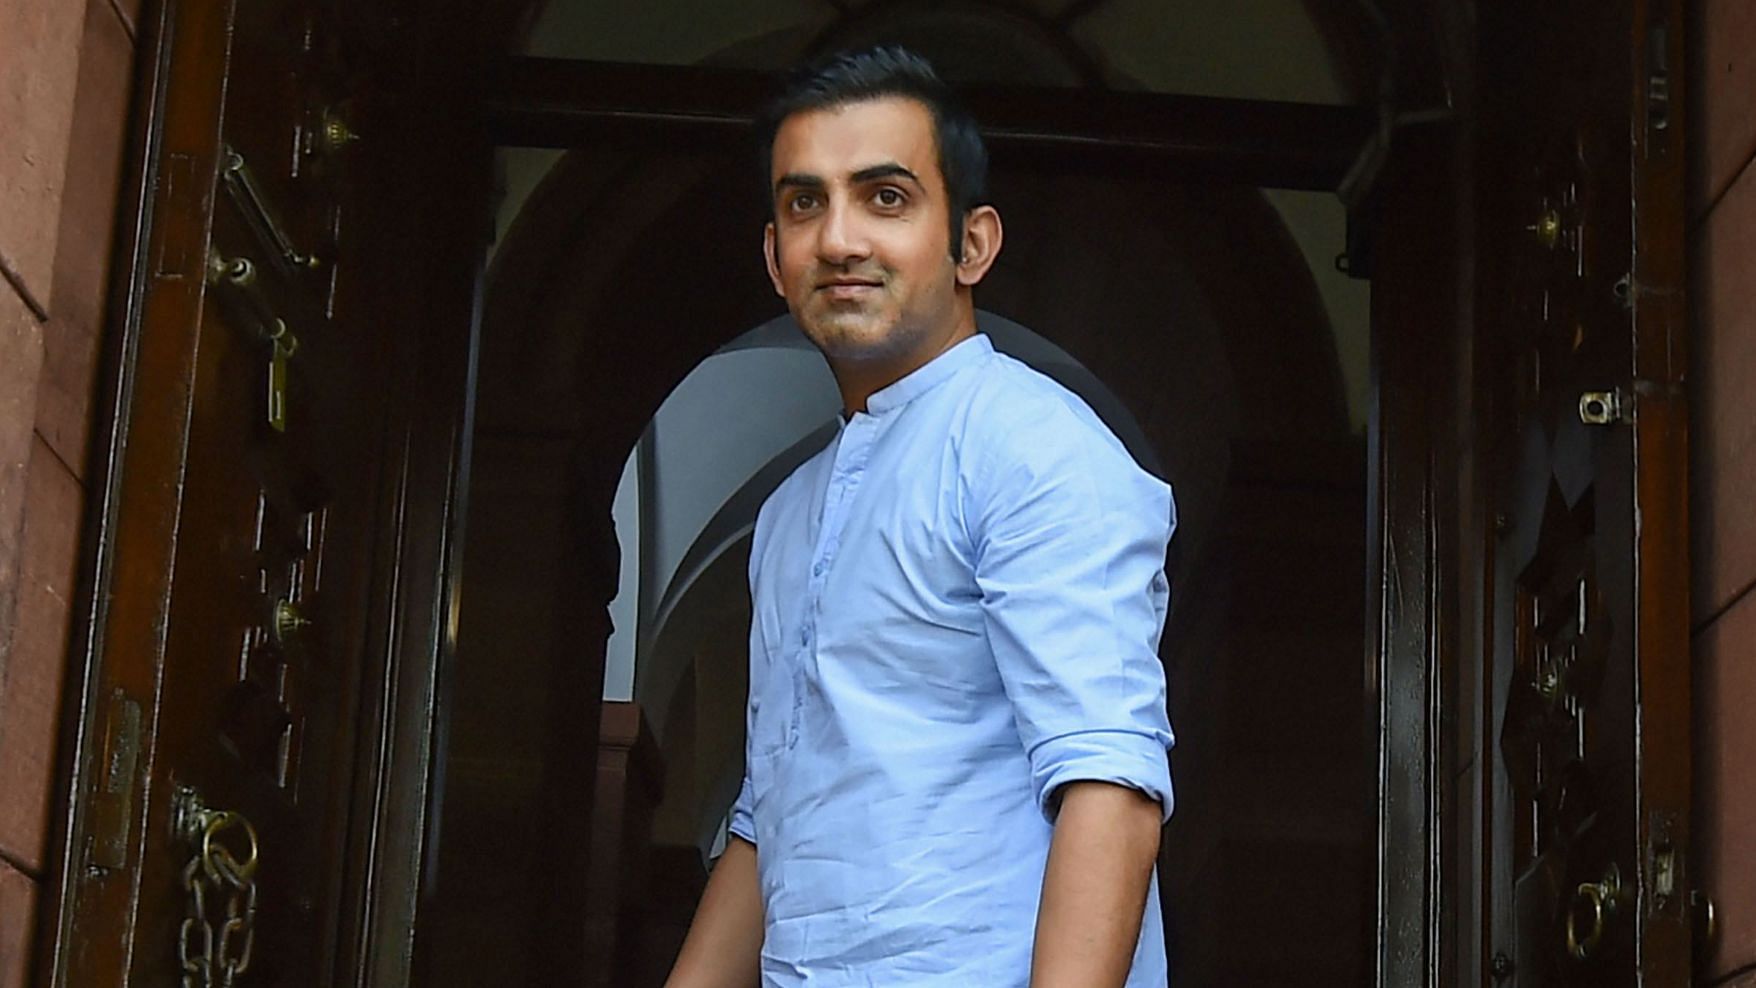 Gautam Gambhir has alleged that the protest outside Jamia Millia Islamia University against the Citizenship Amendment Act was politicised by the Aam Aadmi Party.